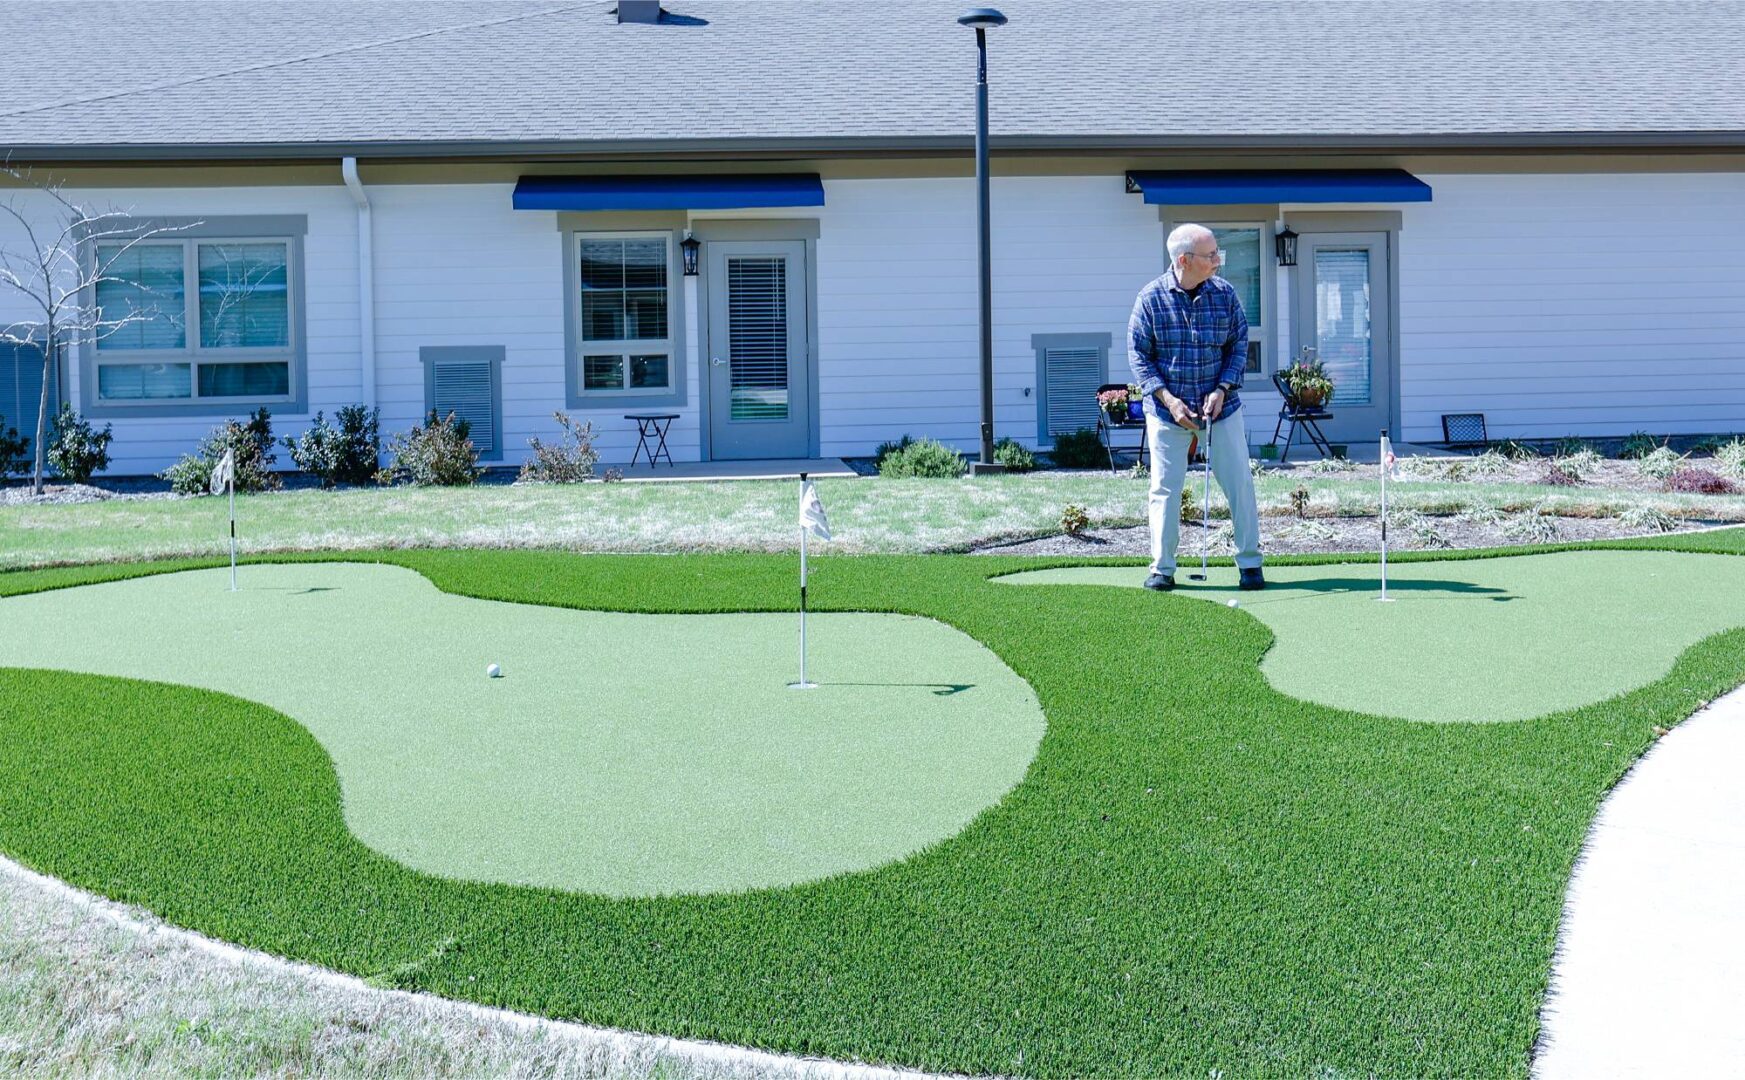 A man playing golf in the backyard of his home.